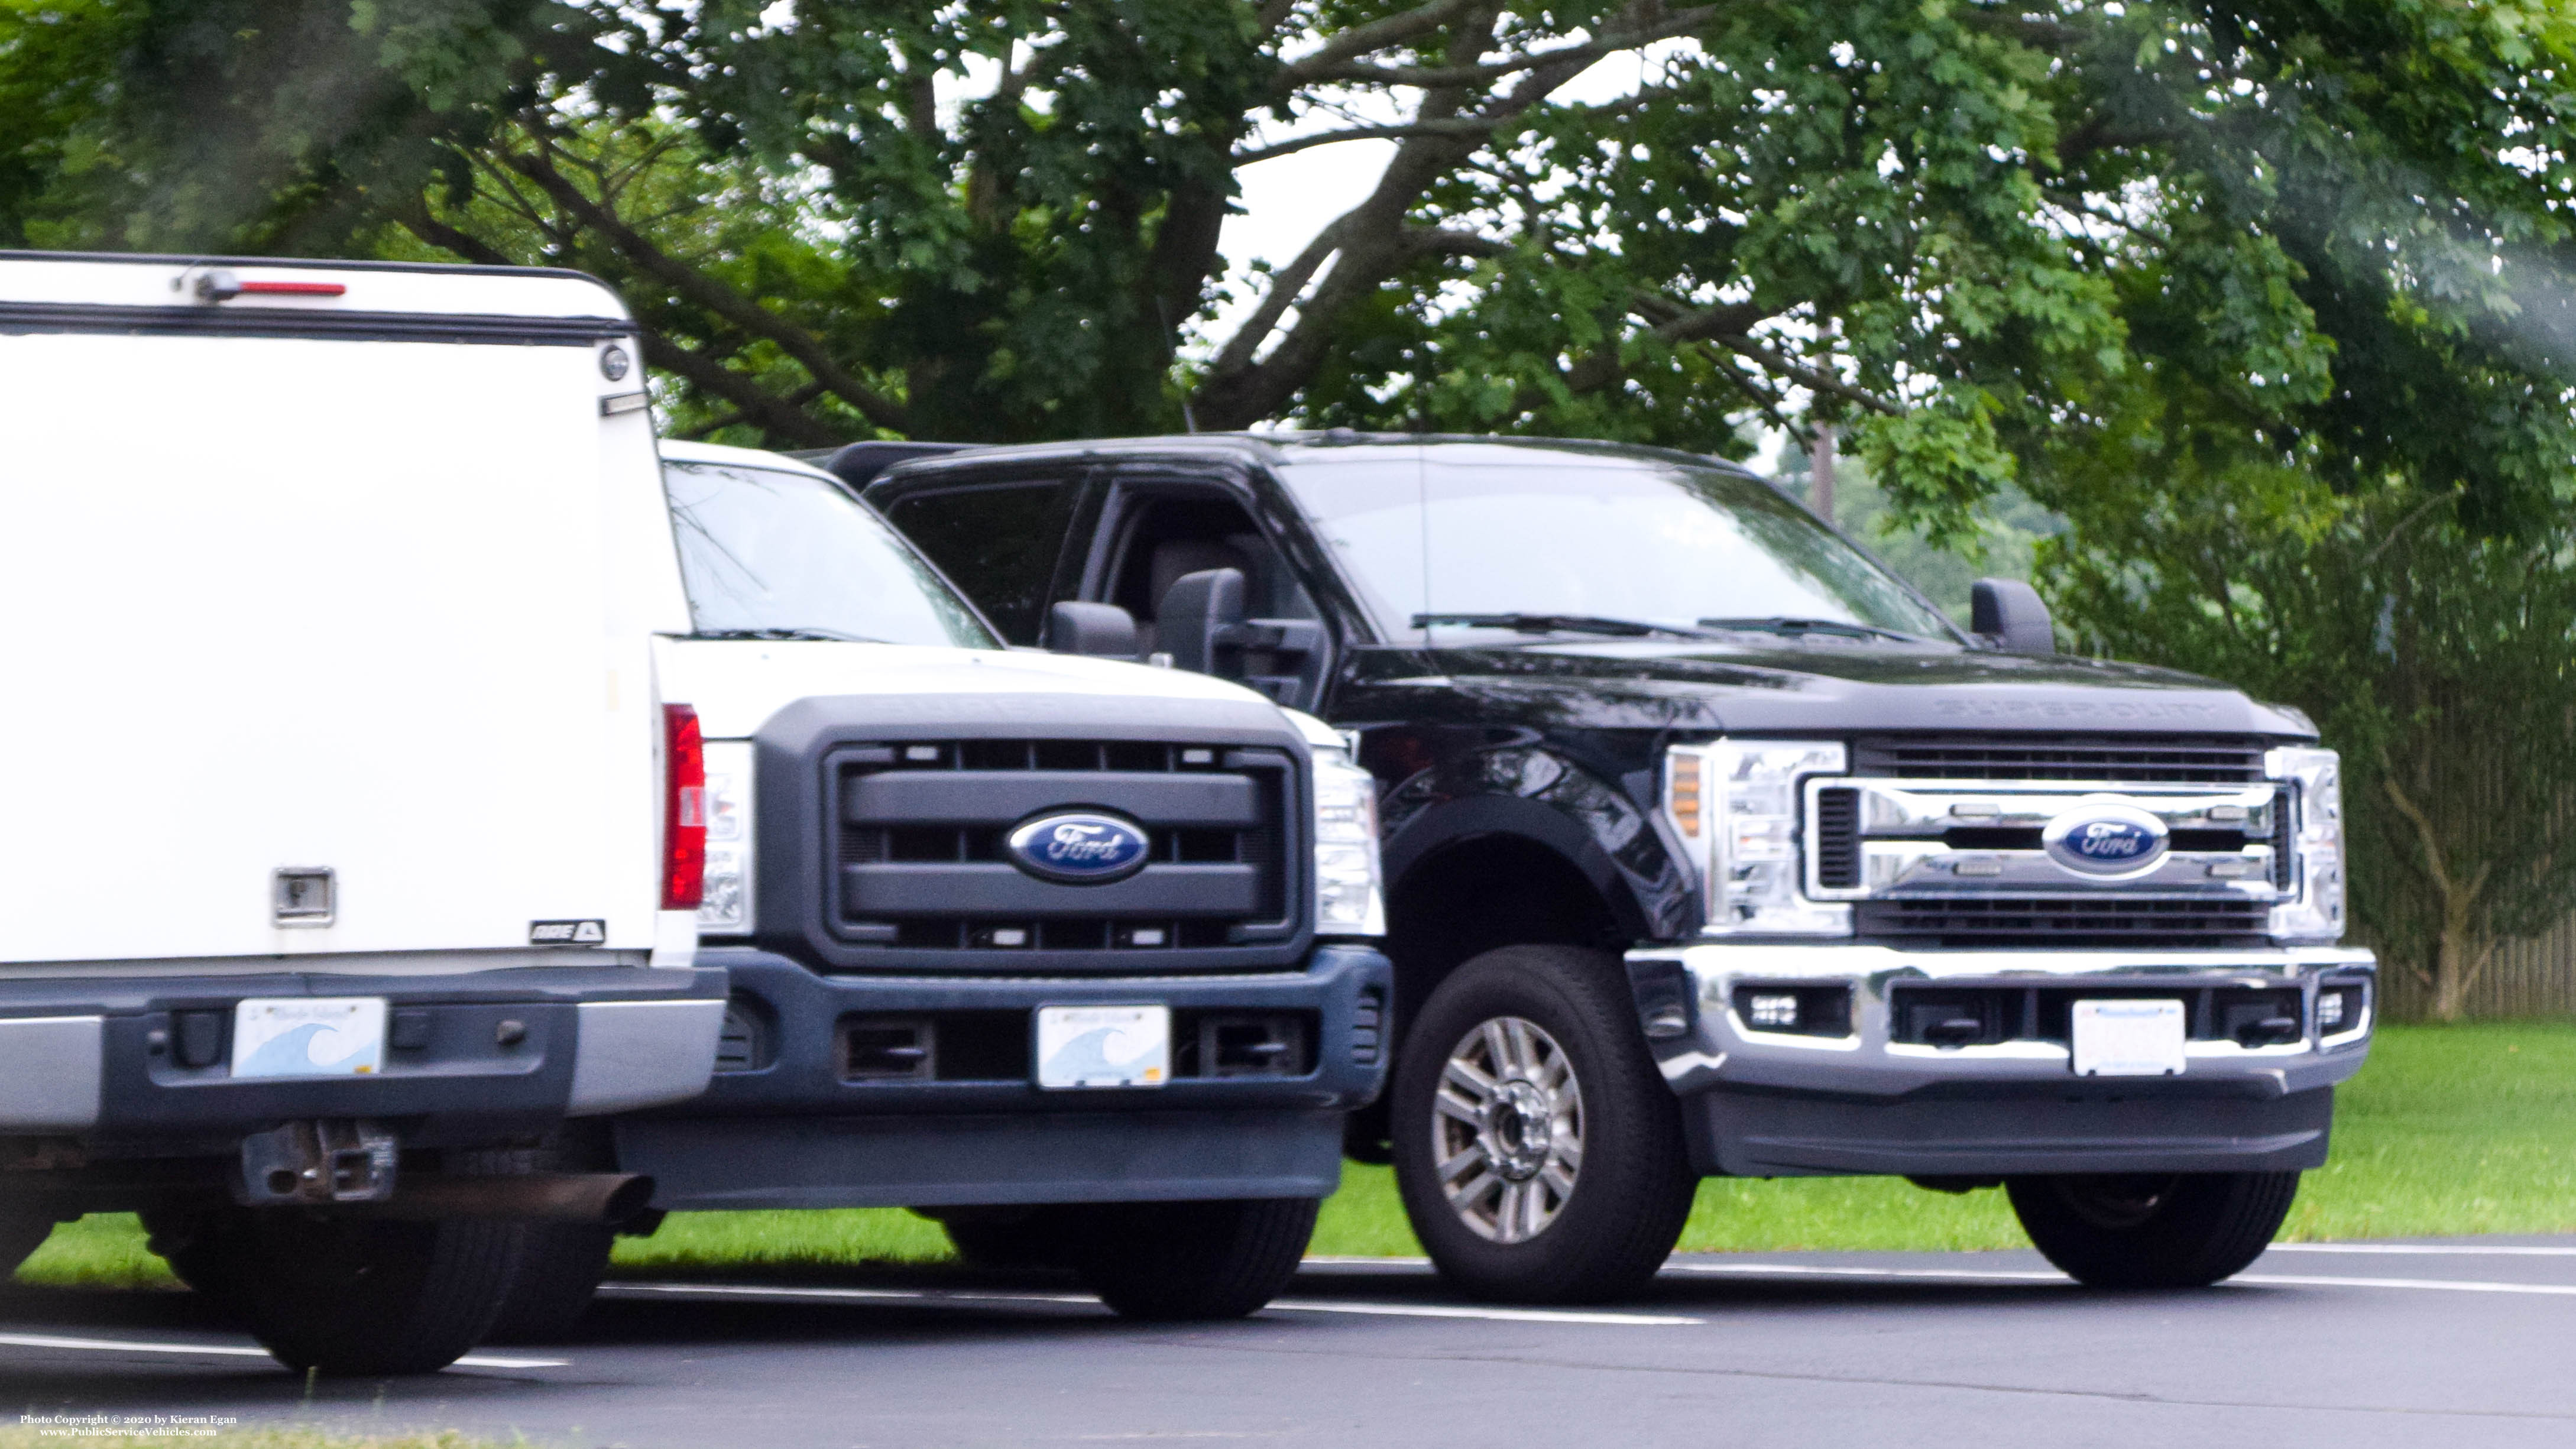 A photo  of Massachusetts State Police
            Unmarked Unit, a 2017-2019 Ford F-350 Crew Cab             taken by Kieran Egan